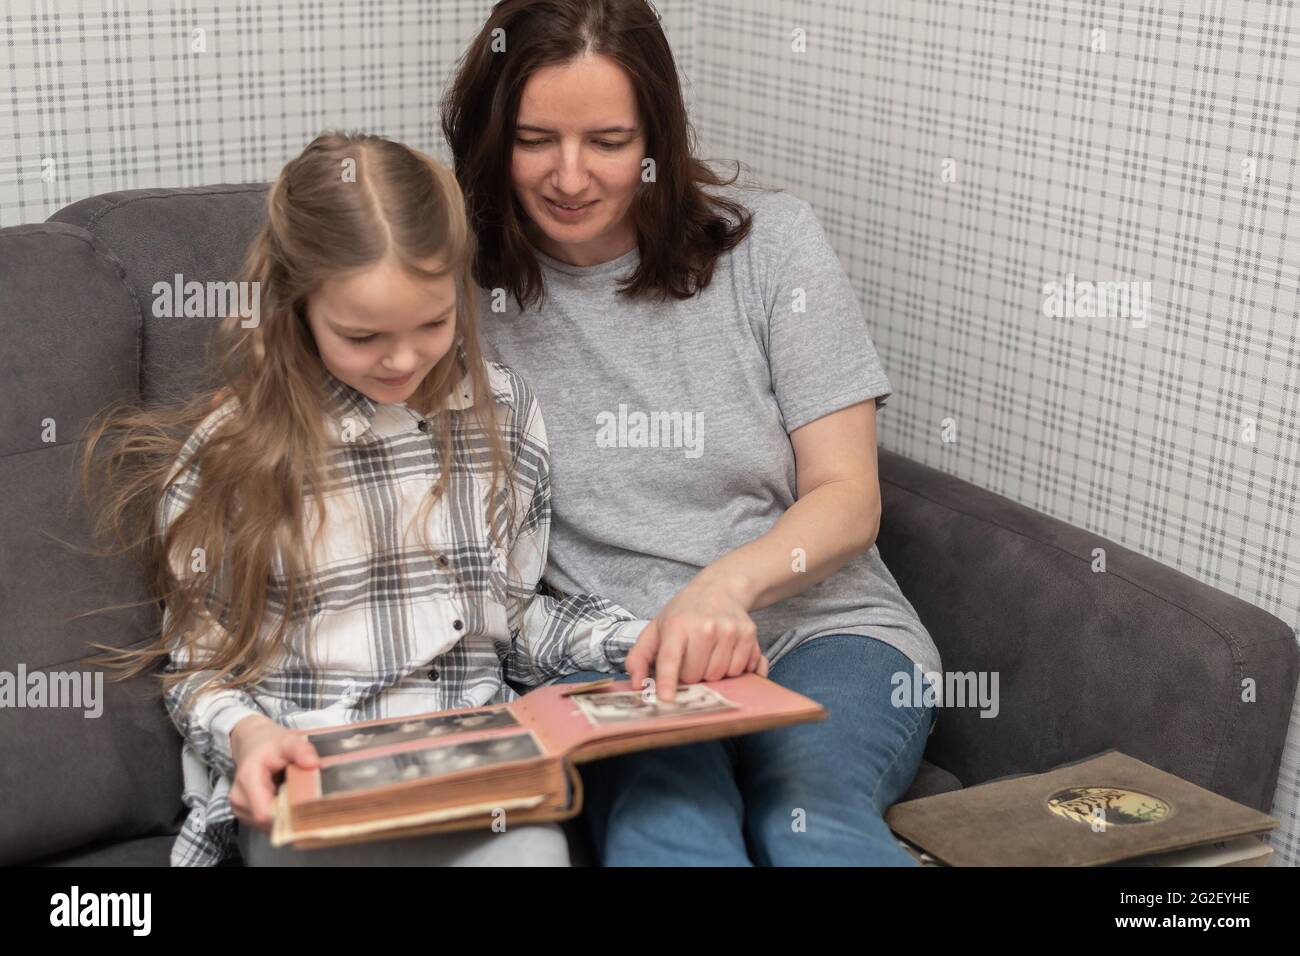 Mom and daughter are sitting on the sofa and look at an old family photo album. Stock Photo